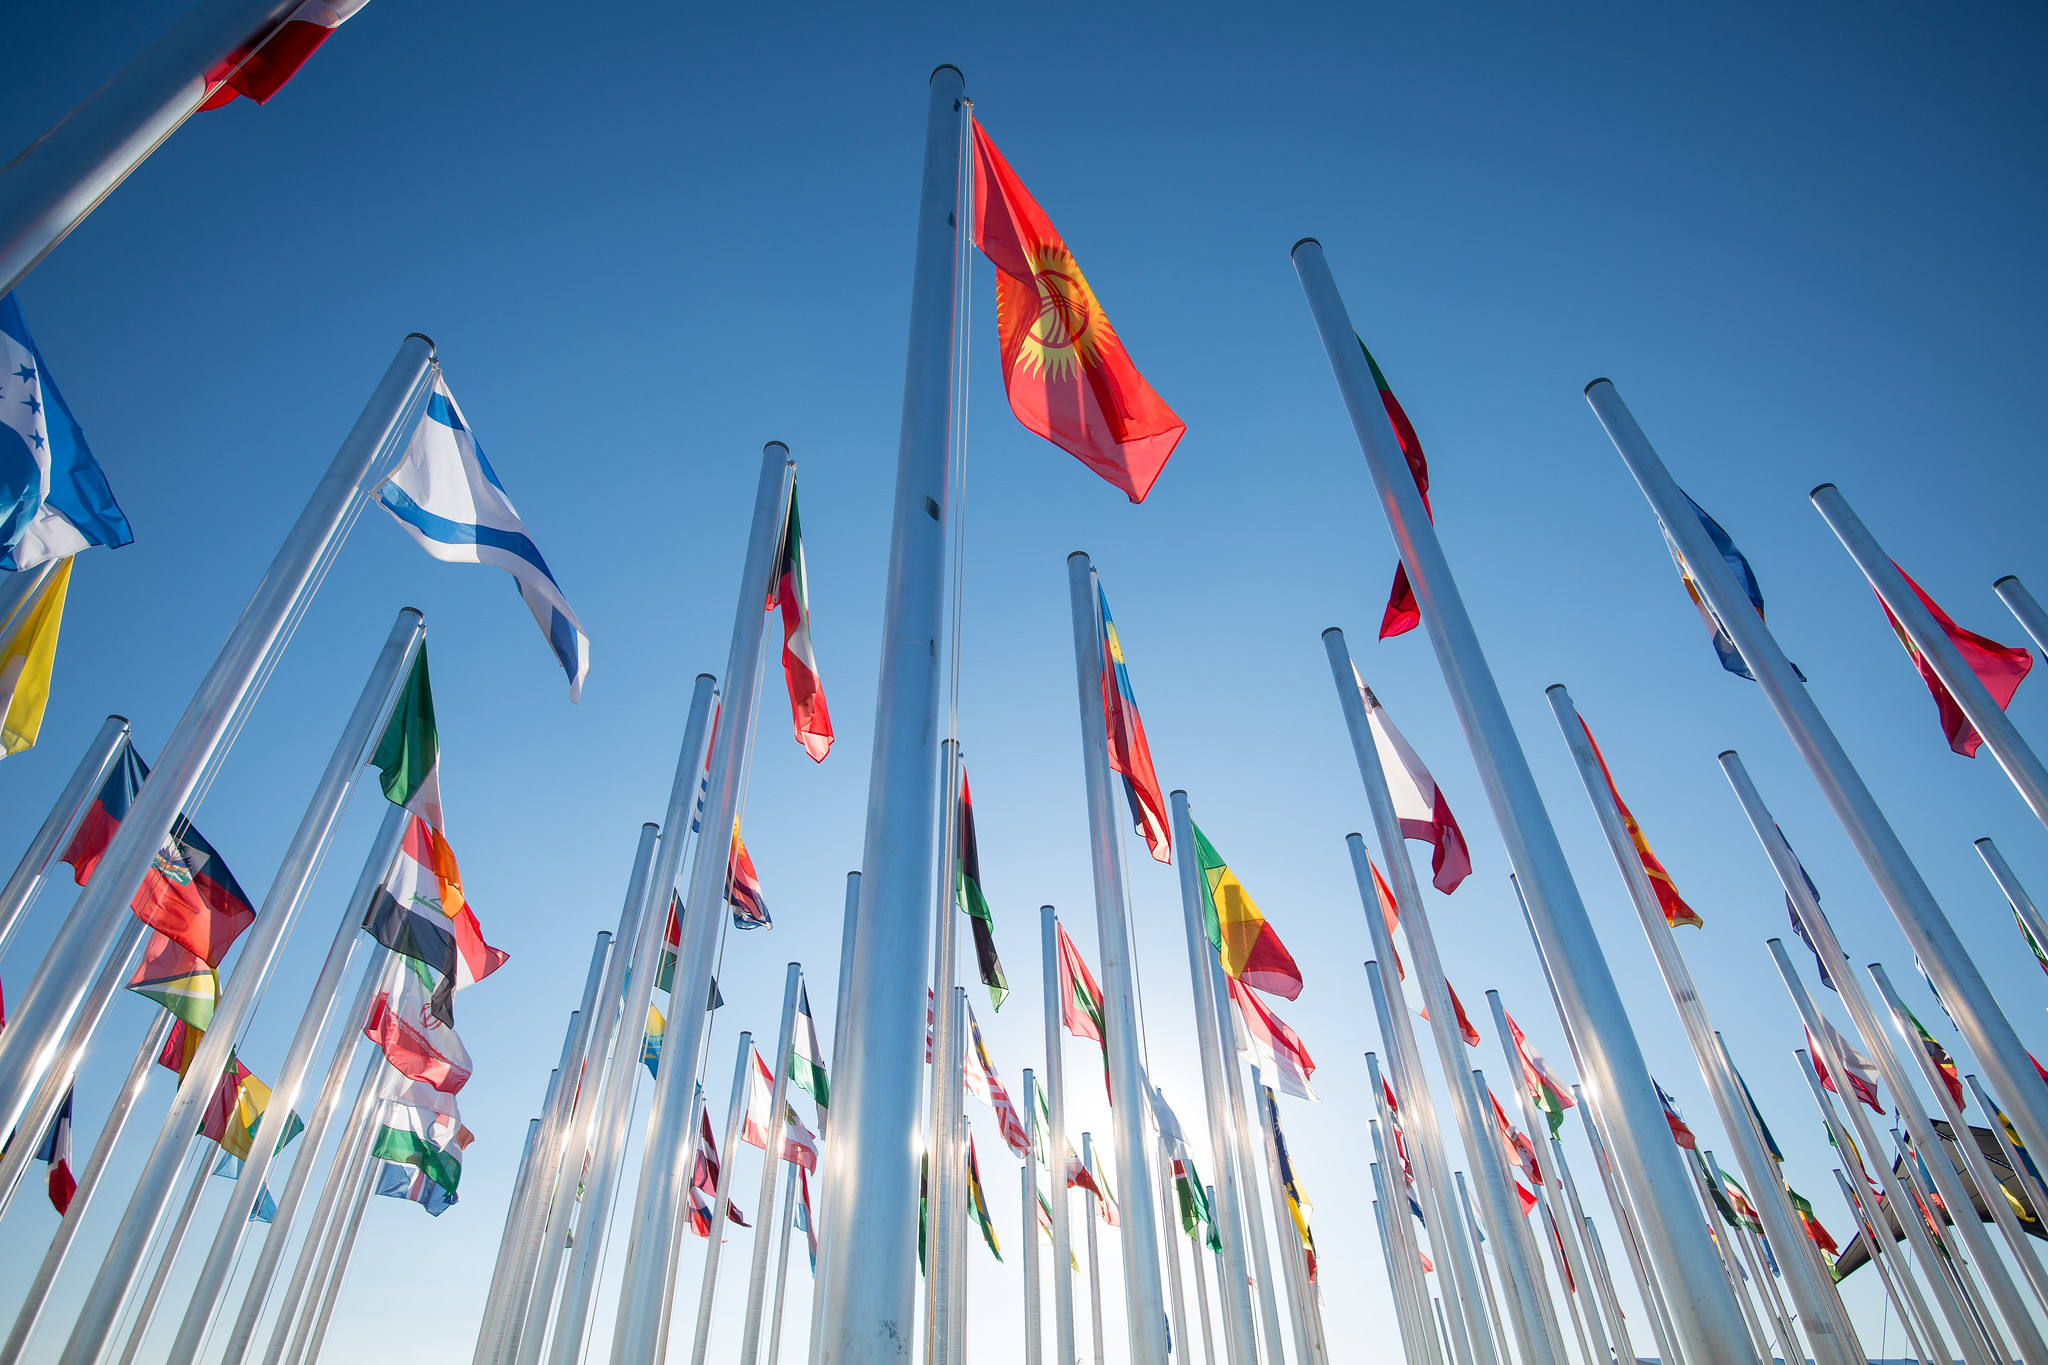 Country Flags outside the UN conference venue